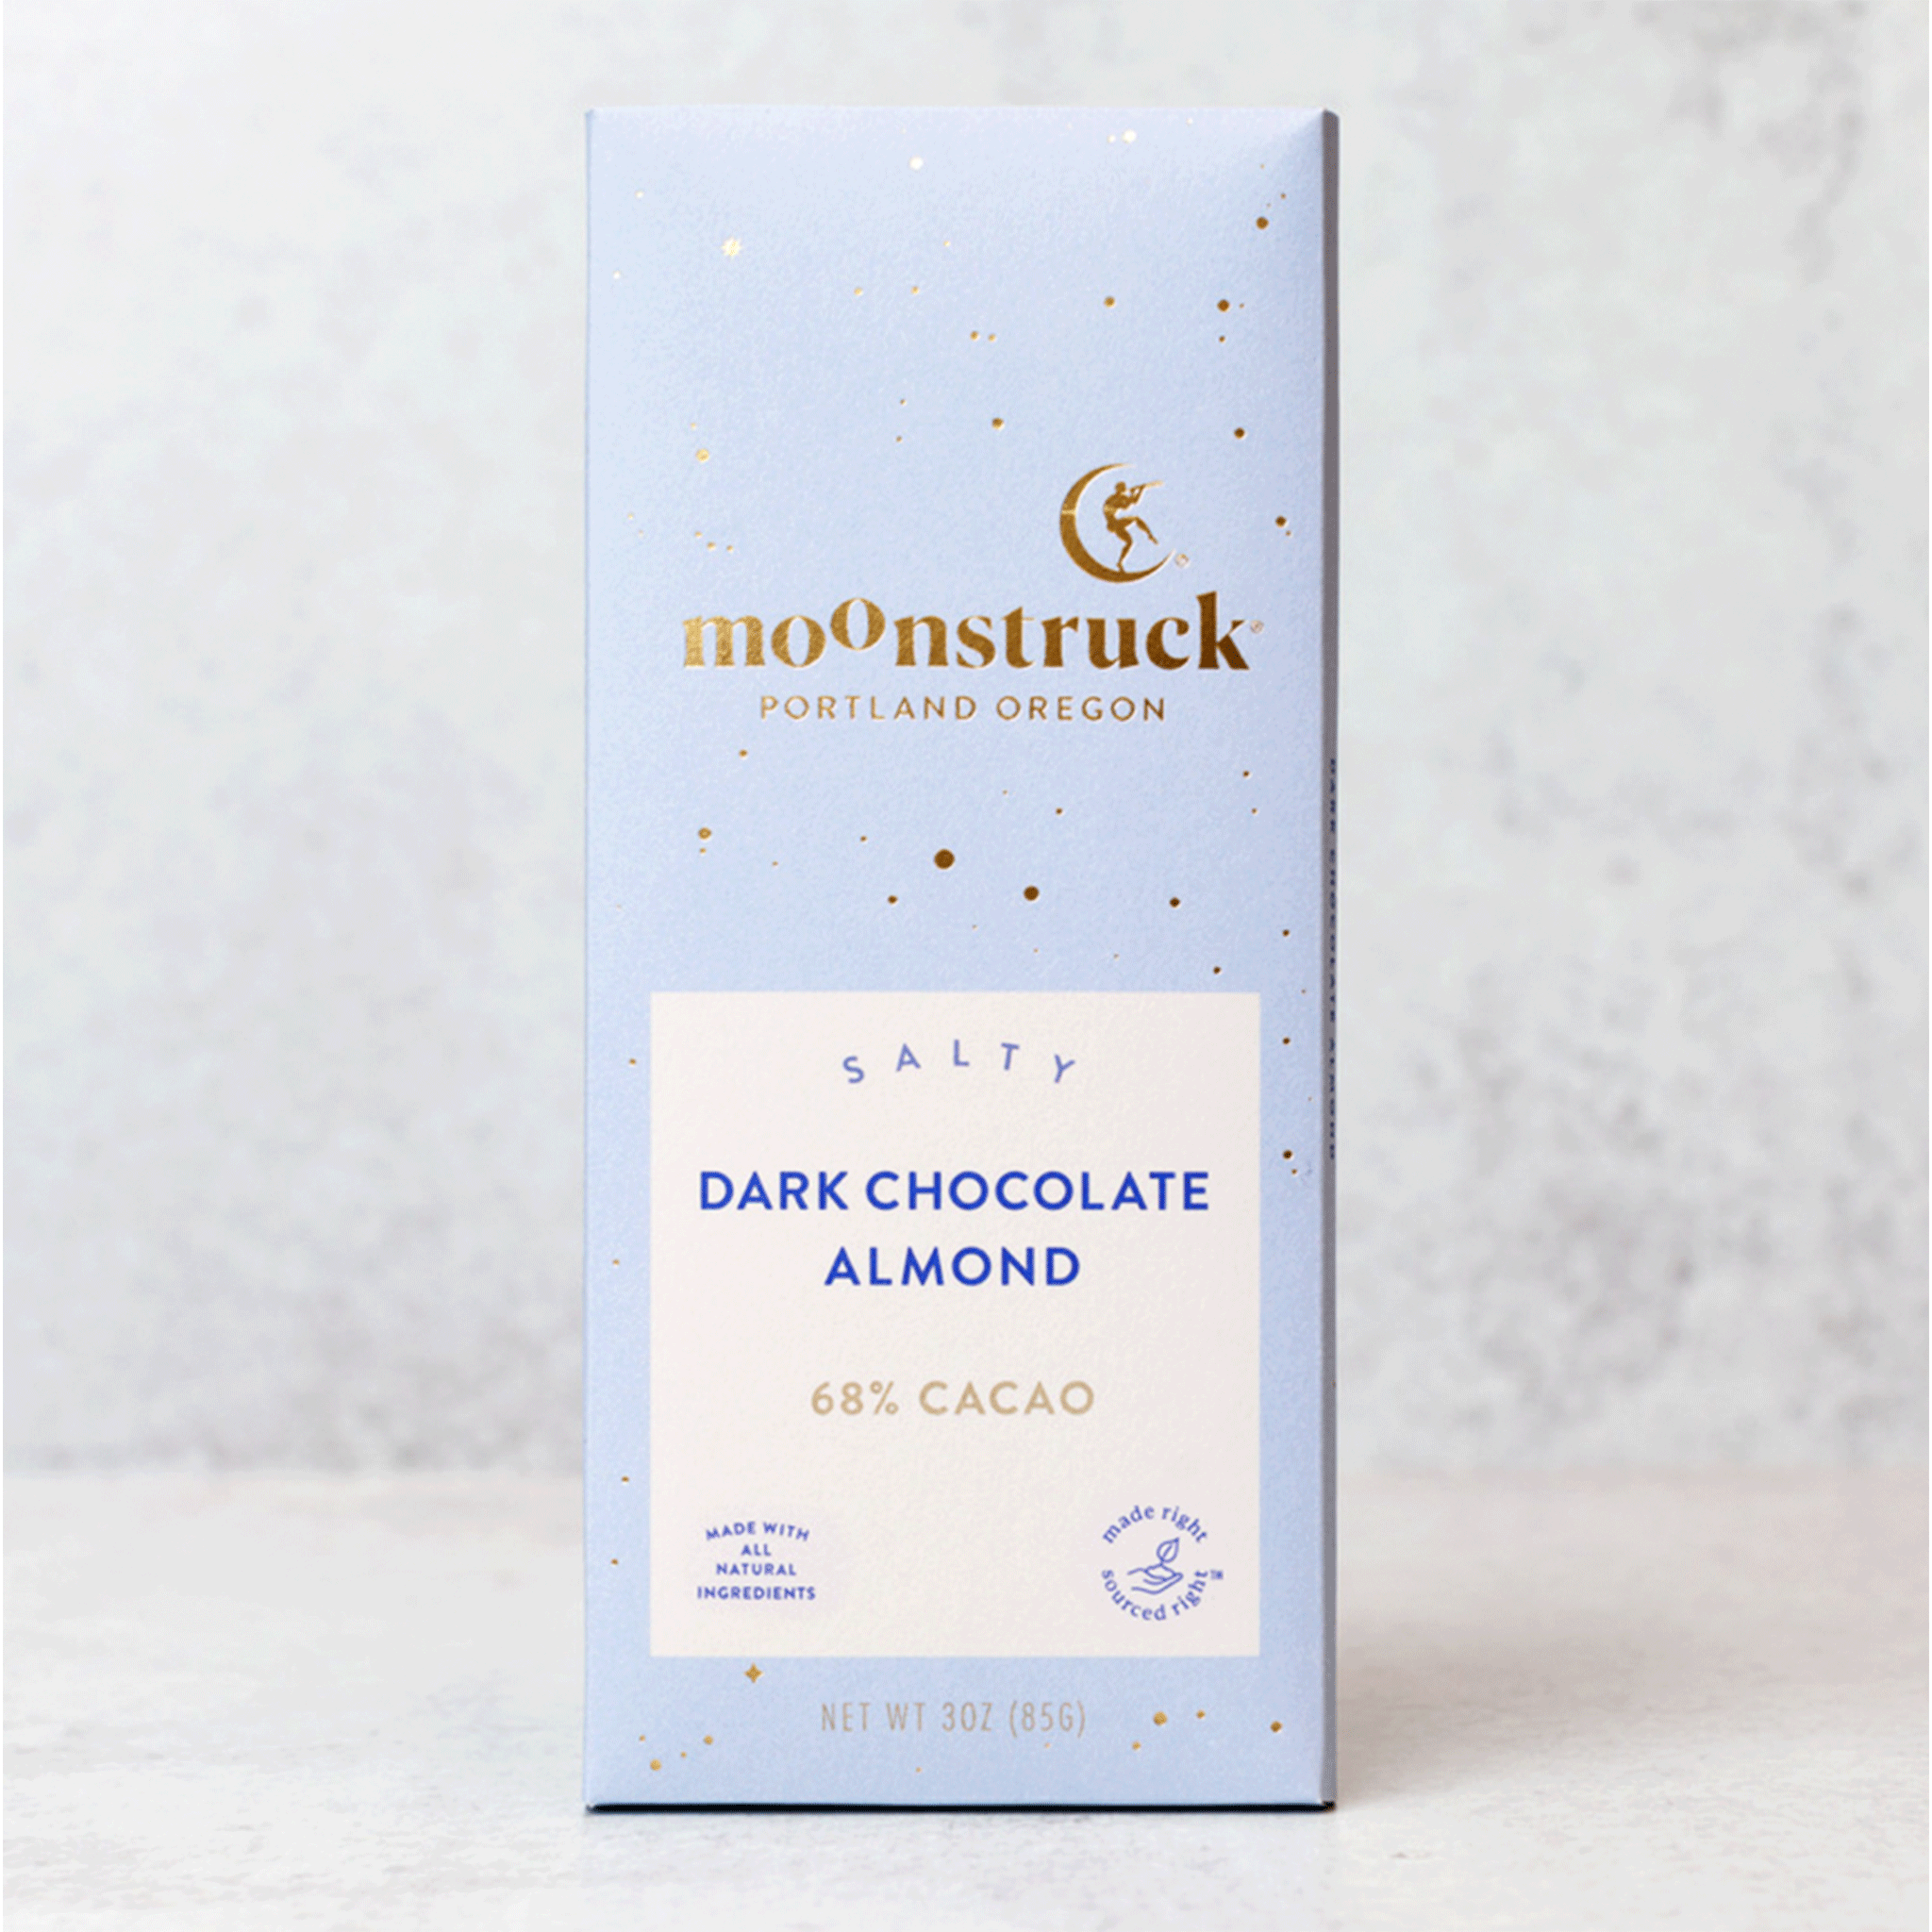 On a grey background is a light blue packaged chocolate bar with gold details and text that reads, "moonstruck Portland Oregon", "Salty Dark Chocolate Almond 68% Cacao".